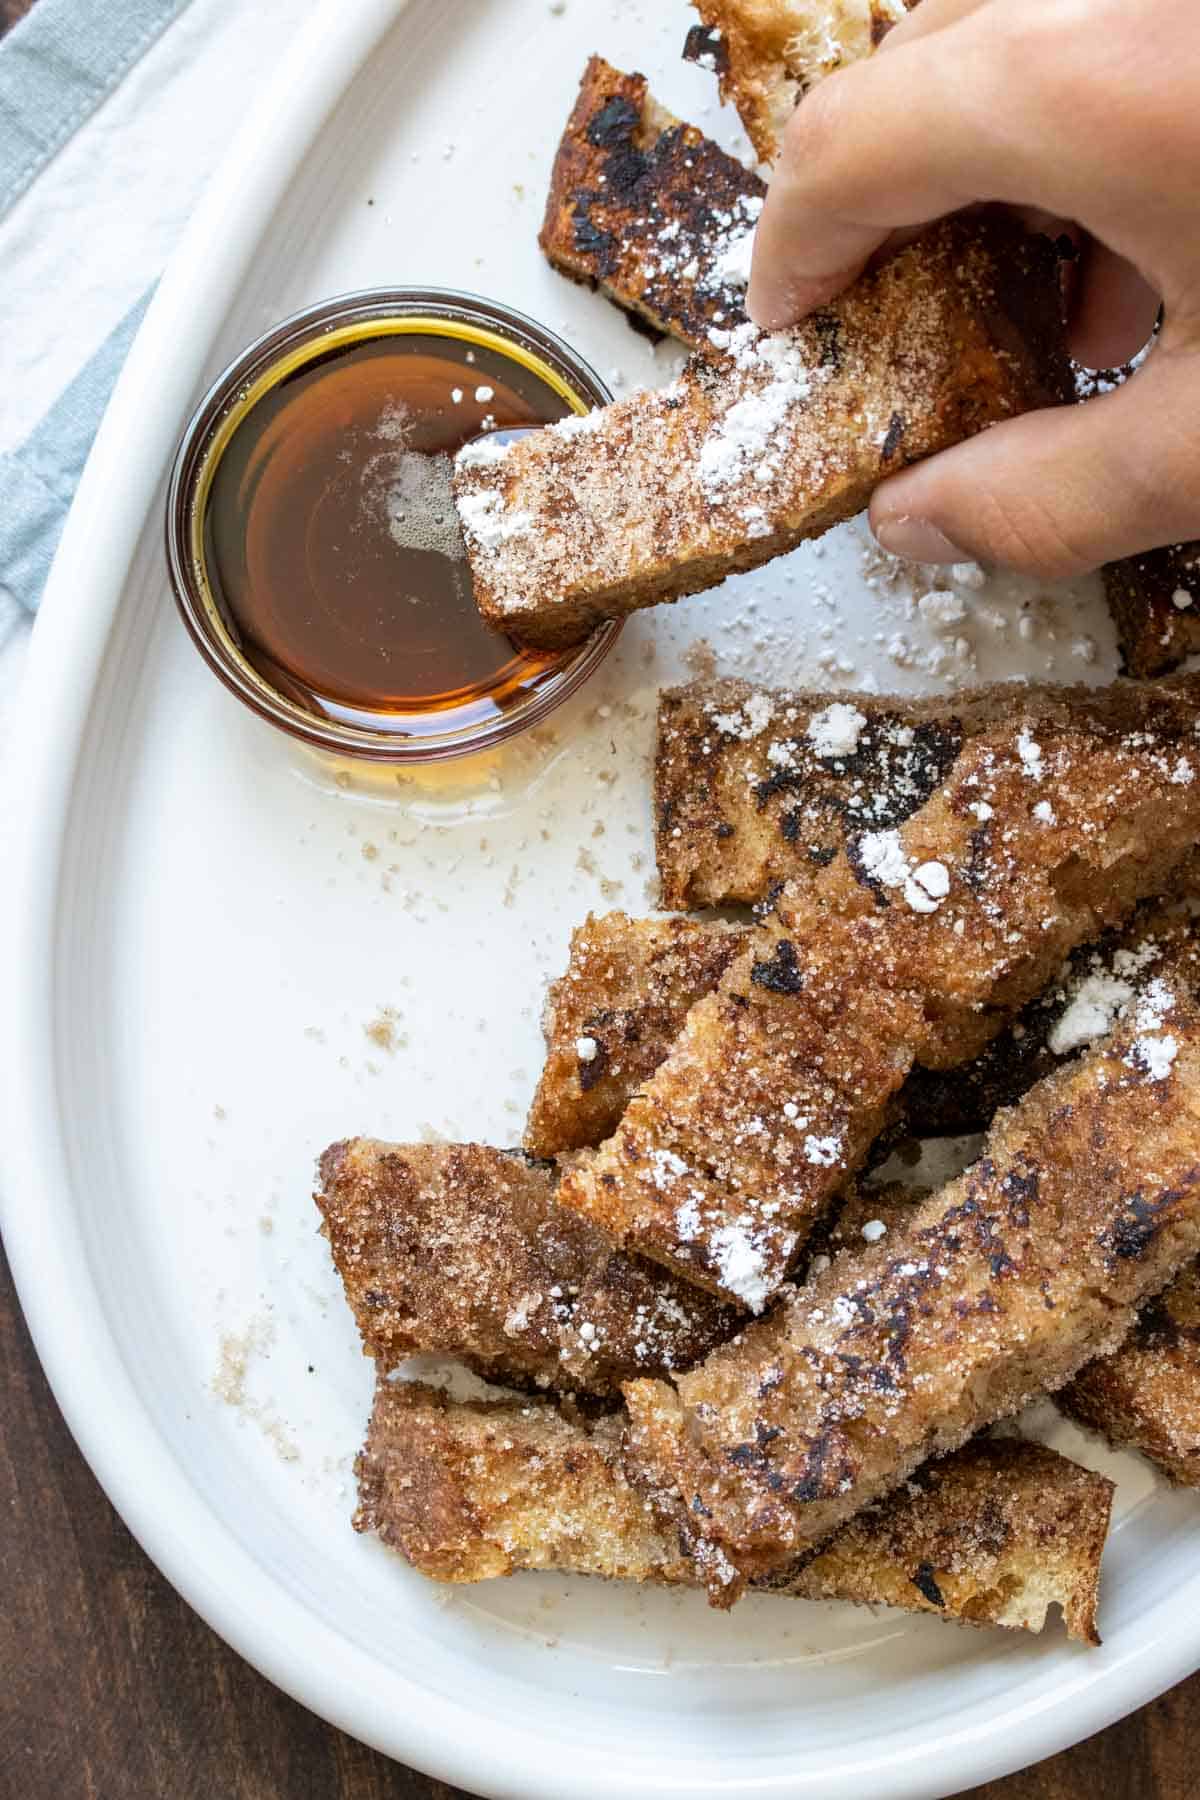 Hand dipping a french toast stick in a small bowl of maple syrup